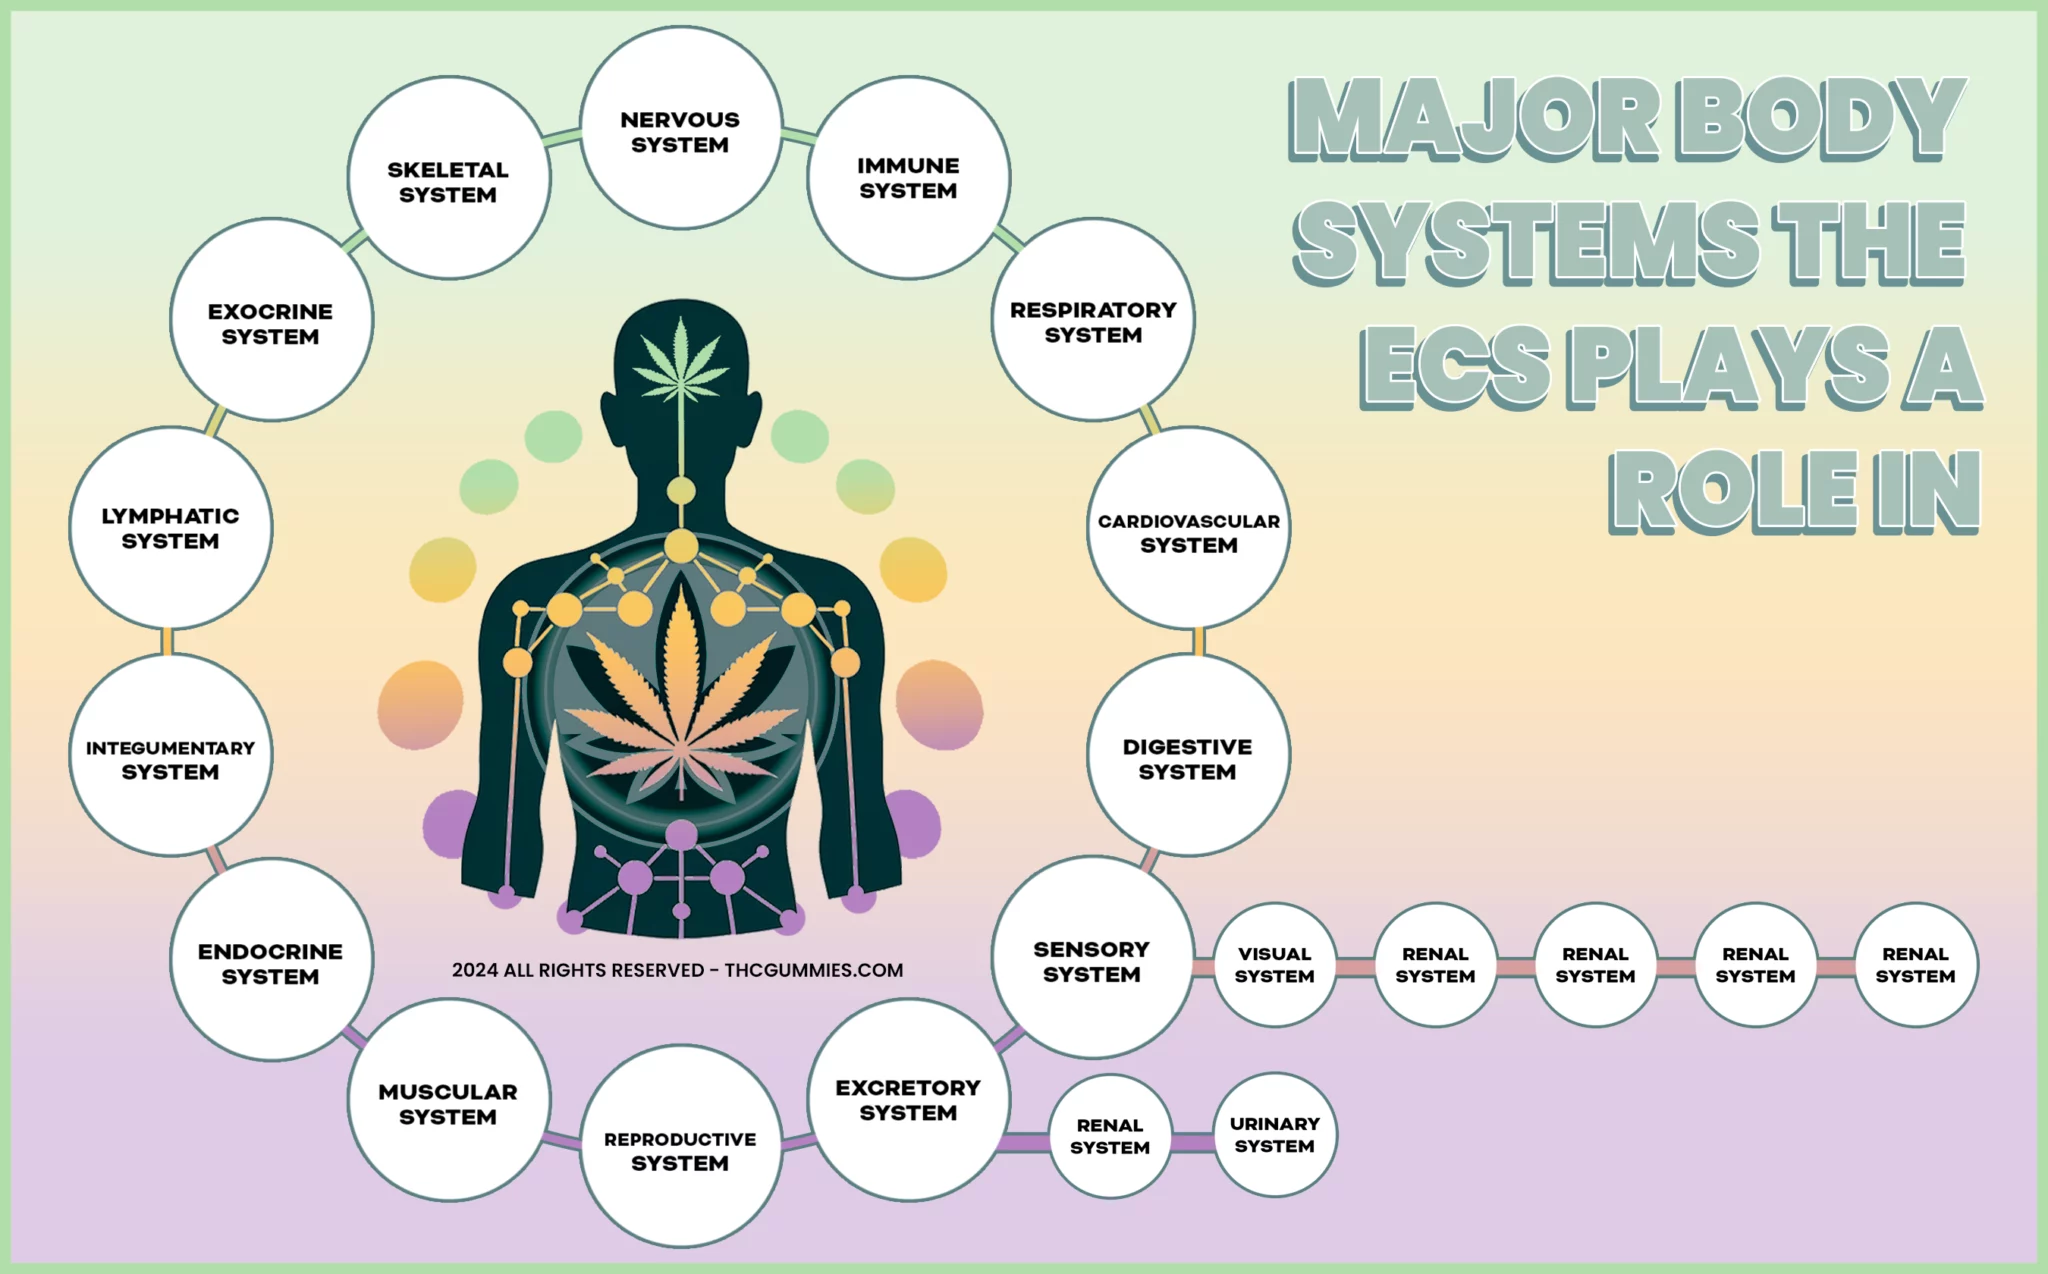 Infographic showcasing the interaction of the endocannabinoid system (ecs) with major human body systems, including the nervous, immune, respiratory, cardiovascular, digestive, sensory, excretory, reproductive, muscular, endocrine, integumentary, lymphatic, exocrine, and skeletal systems, illustrated by a human silhouette with cannabis leaf icon, emphasizing the comprehensive role of ecs in holistic health management - thcgummies. Com watermark included.